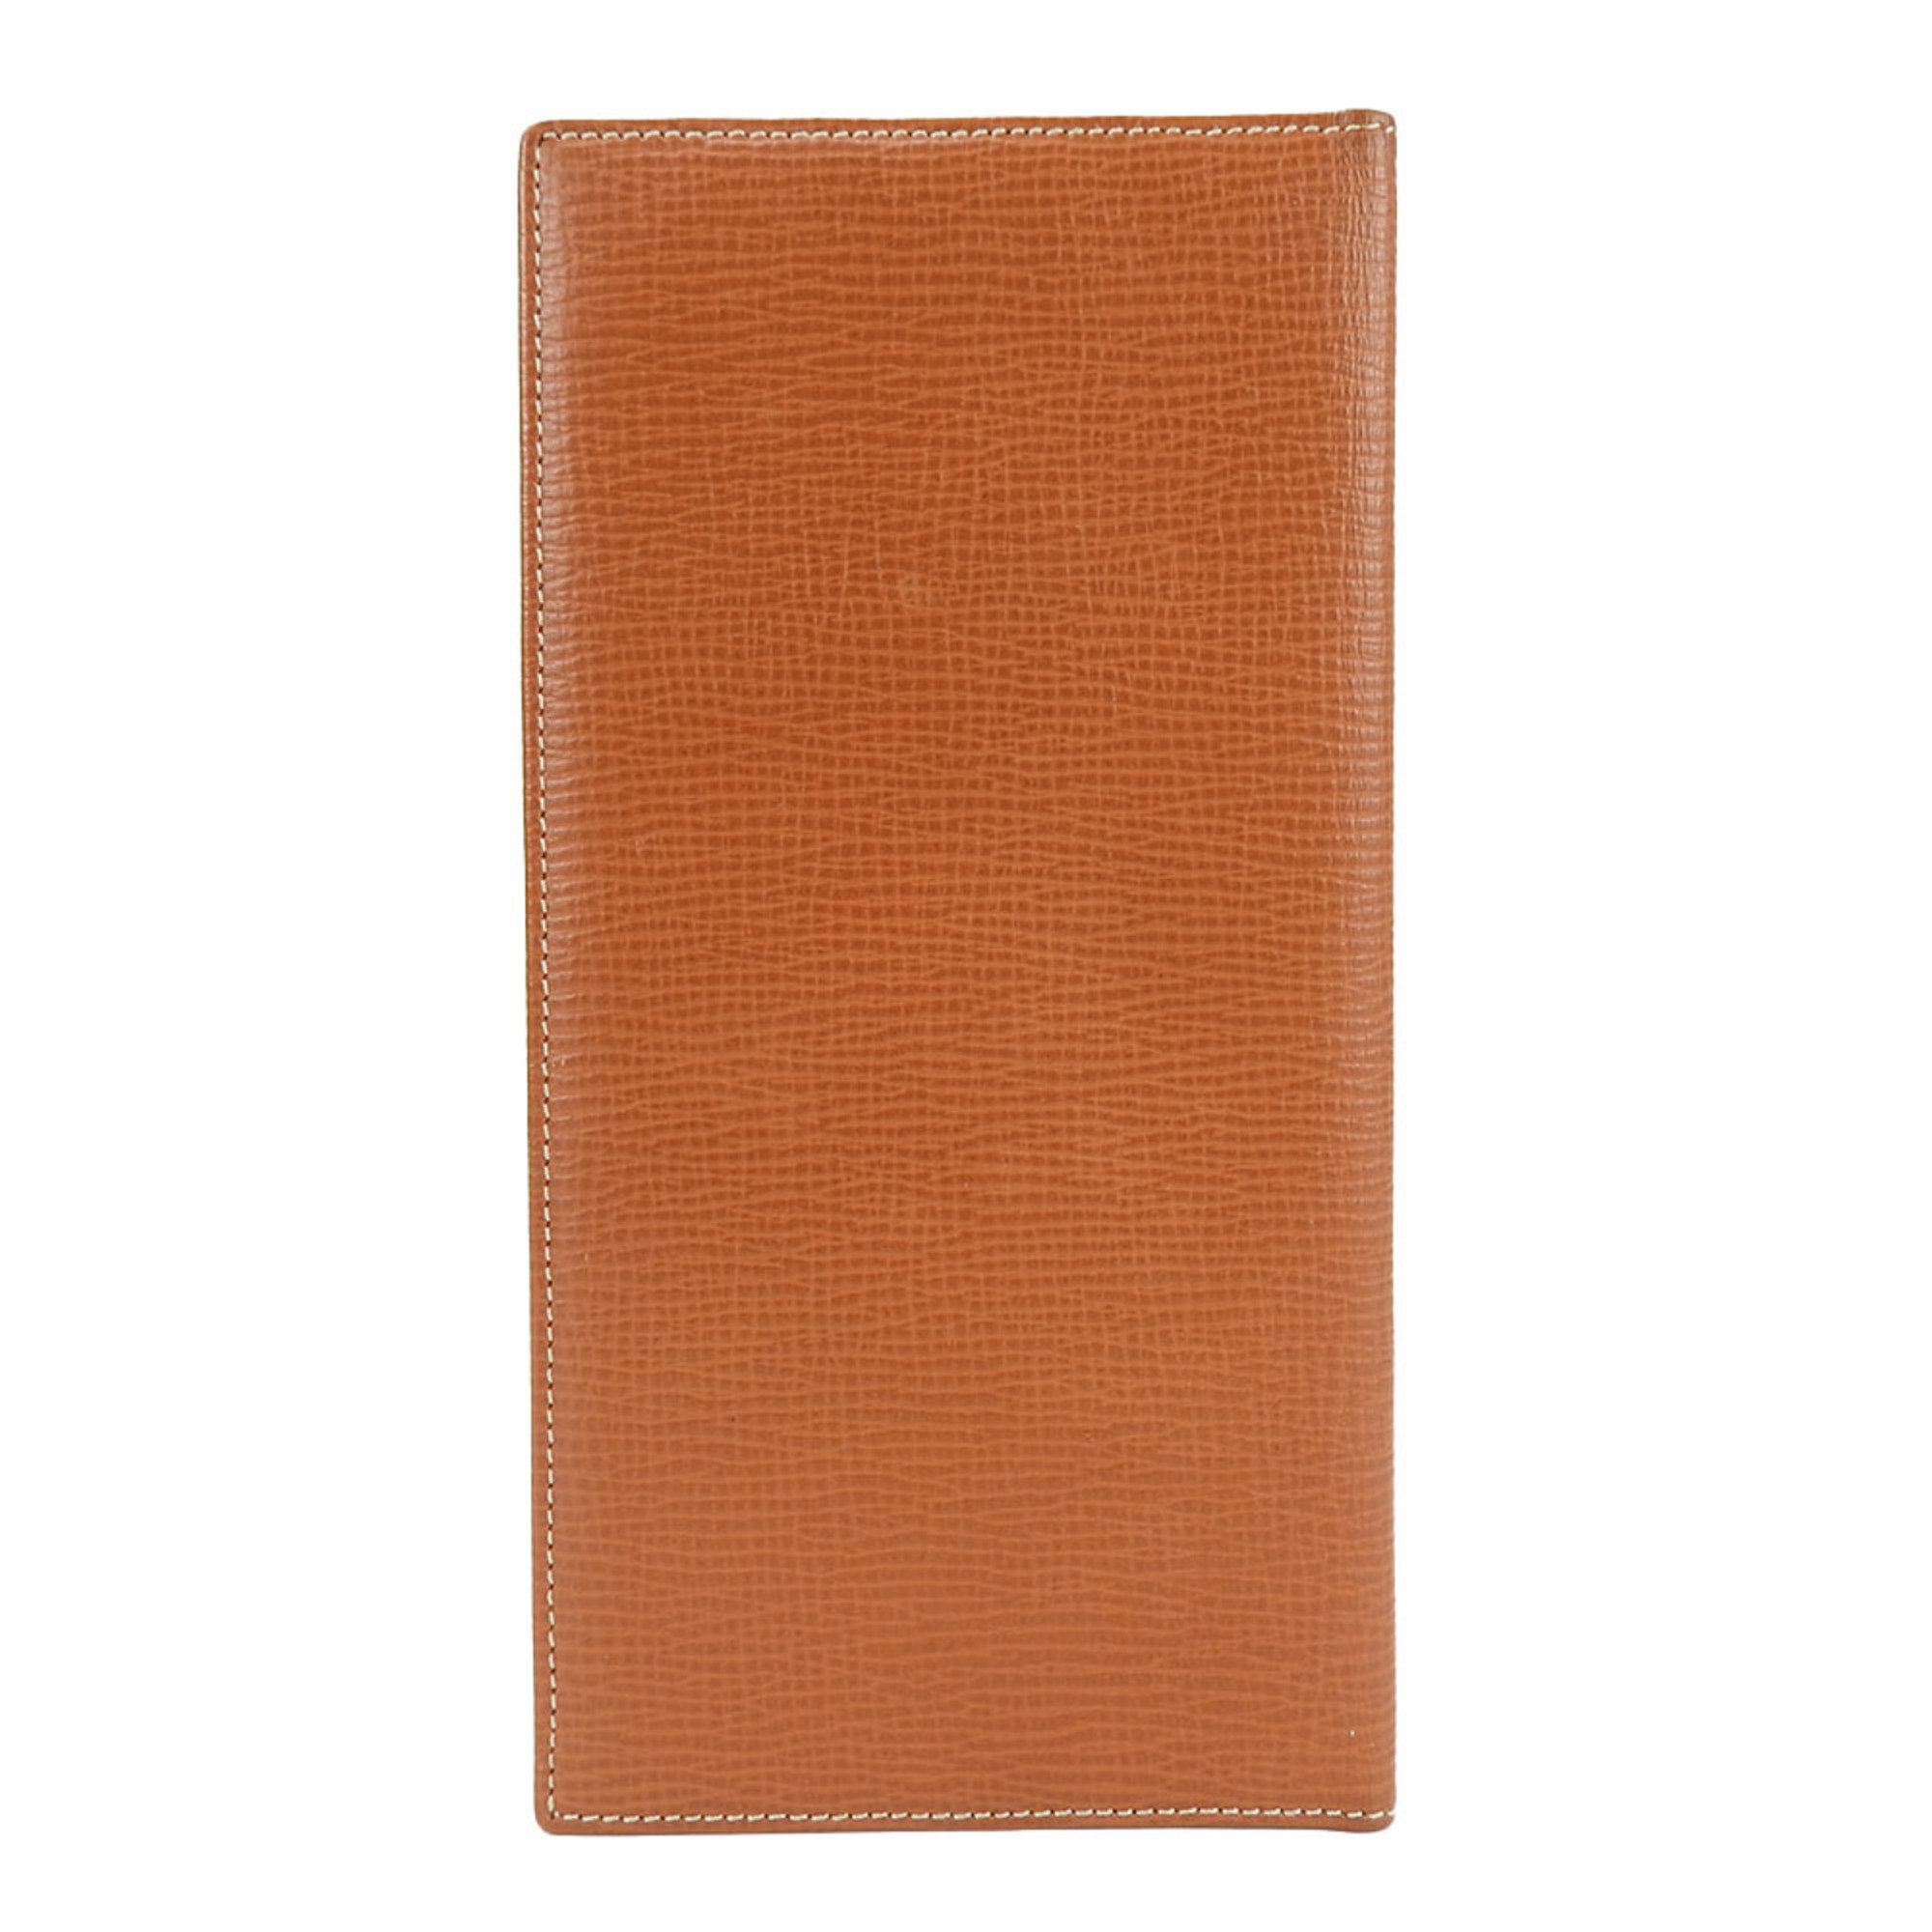 LOEWE Wallet Leather Brown Business Card Holder/Card Case Women's